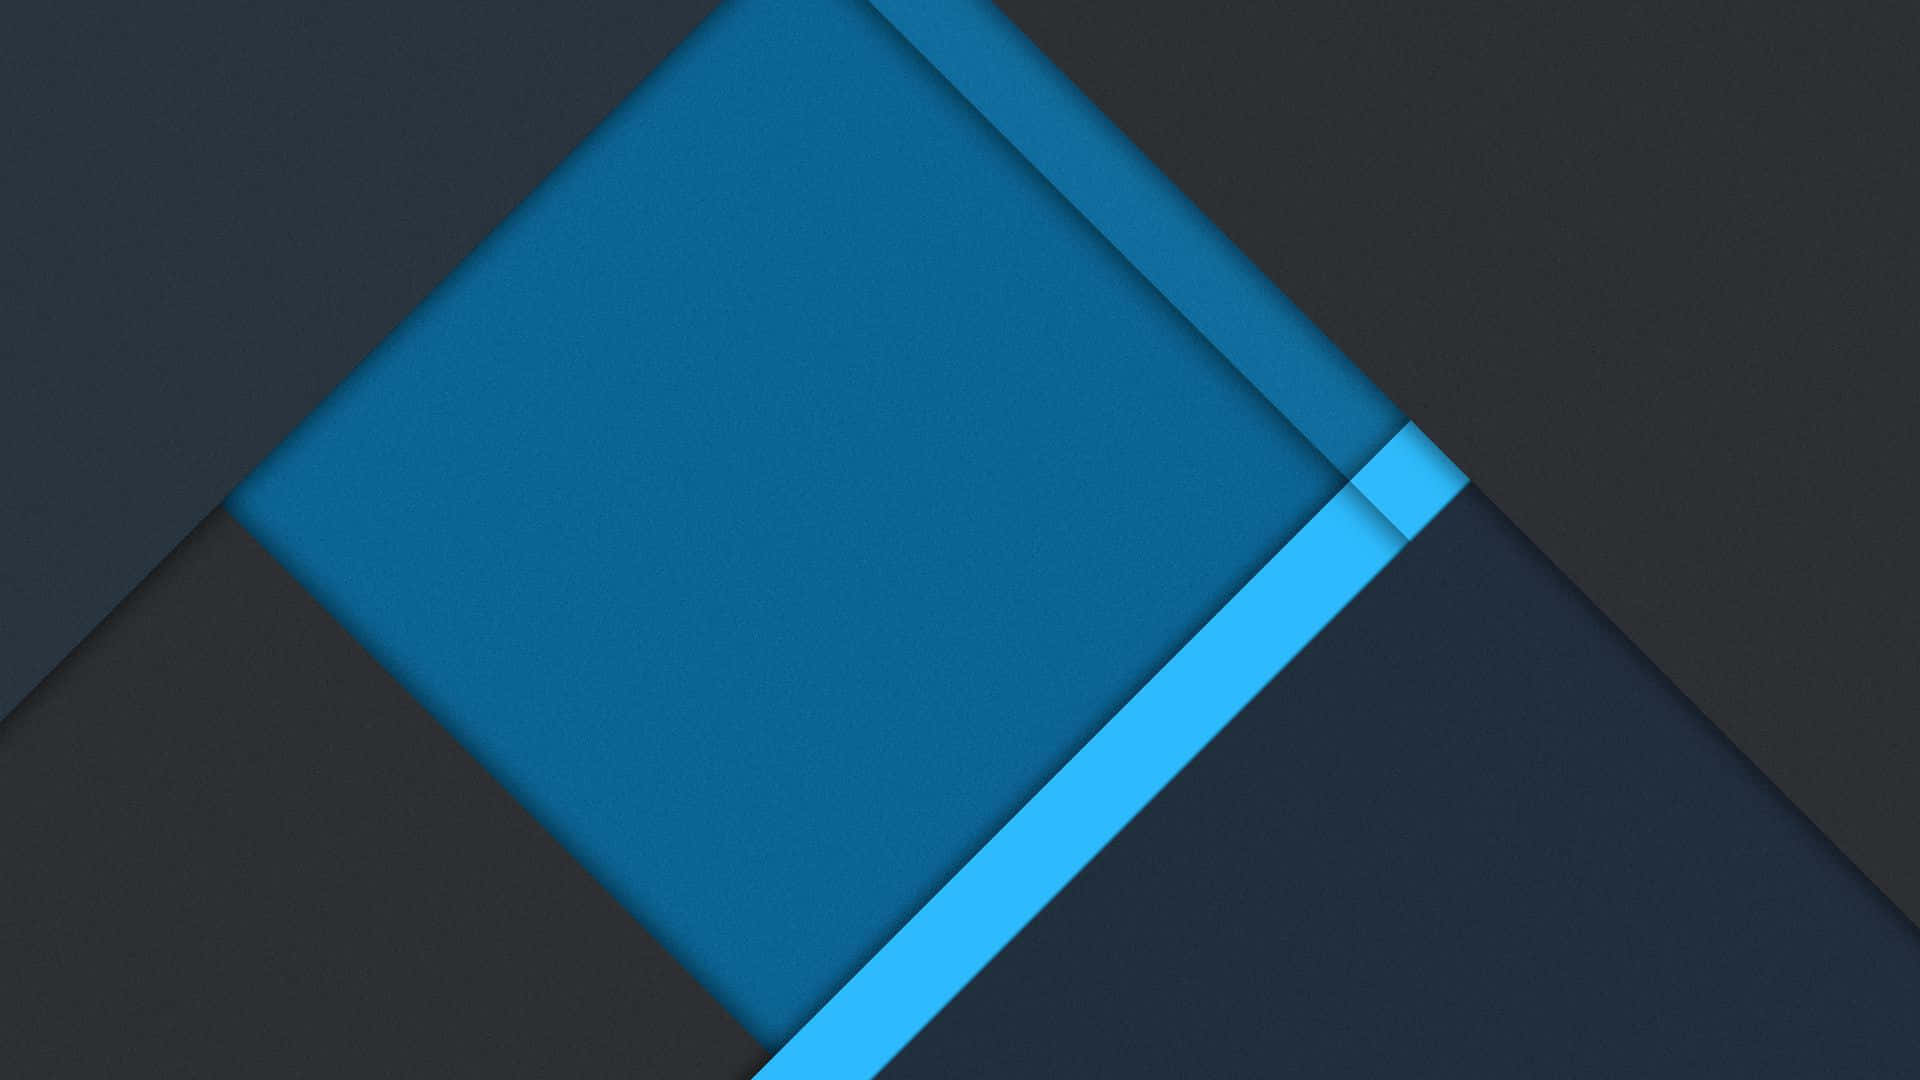 Hd Material Background In Blue 2D Box